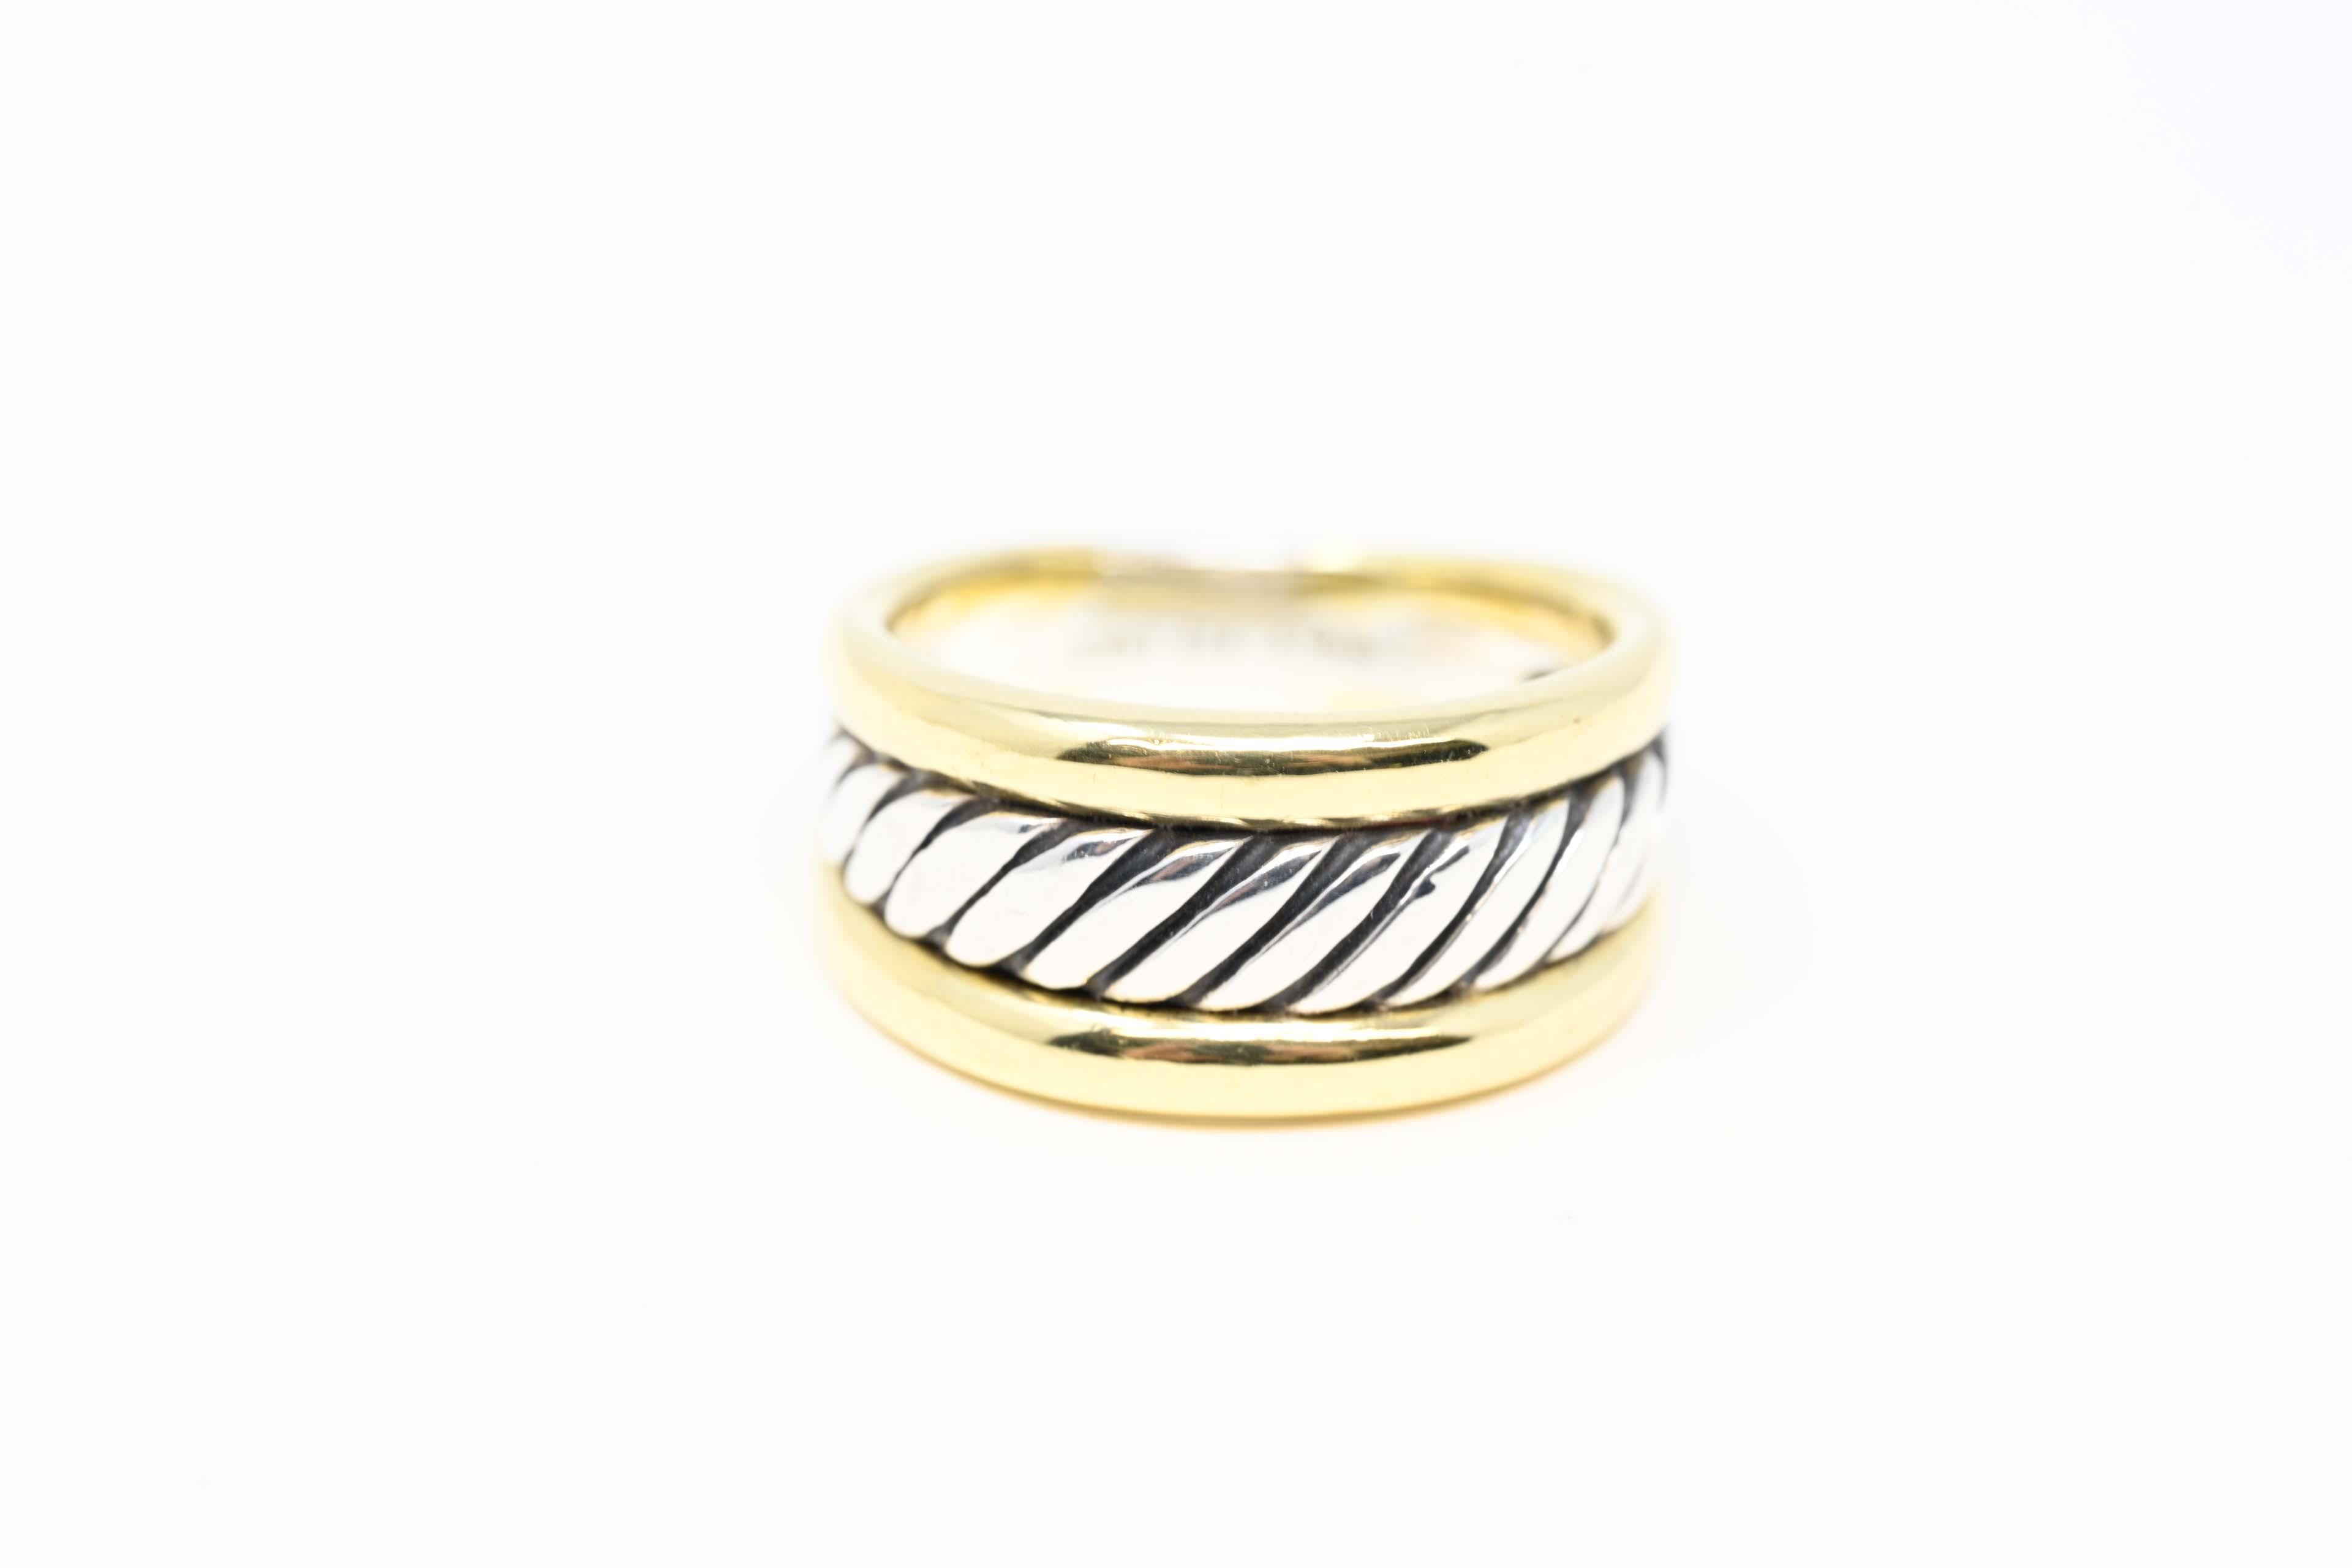 David Yurman 925 silver & 18k yellow gold thoroughbred ring. The ring is a size 6.5 and stamped on the inside 